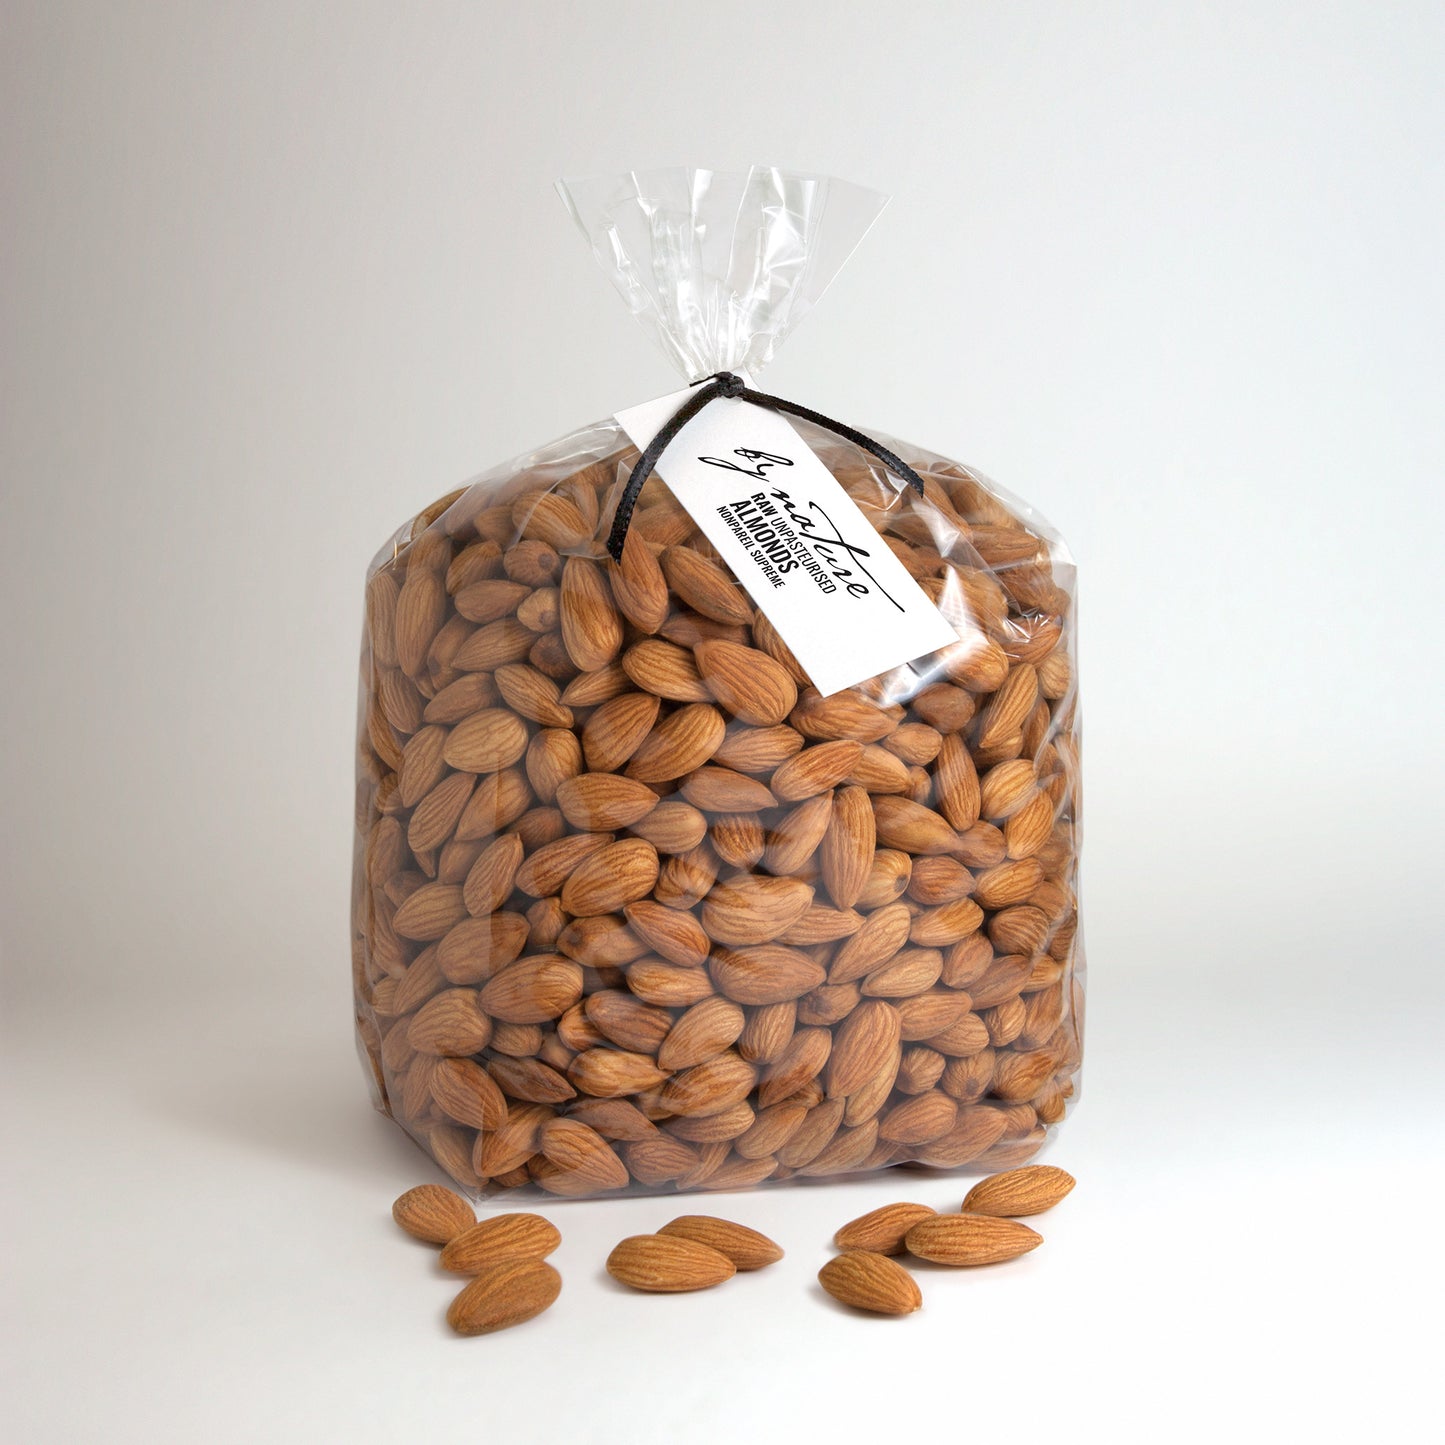 BY NATURE Almonds, 1kg - Nonpareil Supreme variety, raw, unpasteurised.